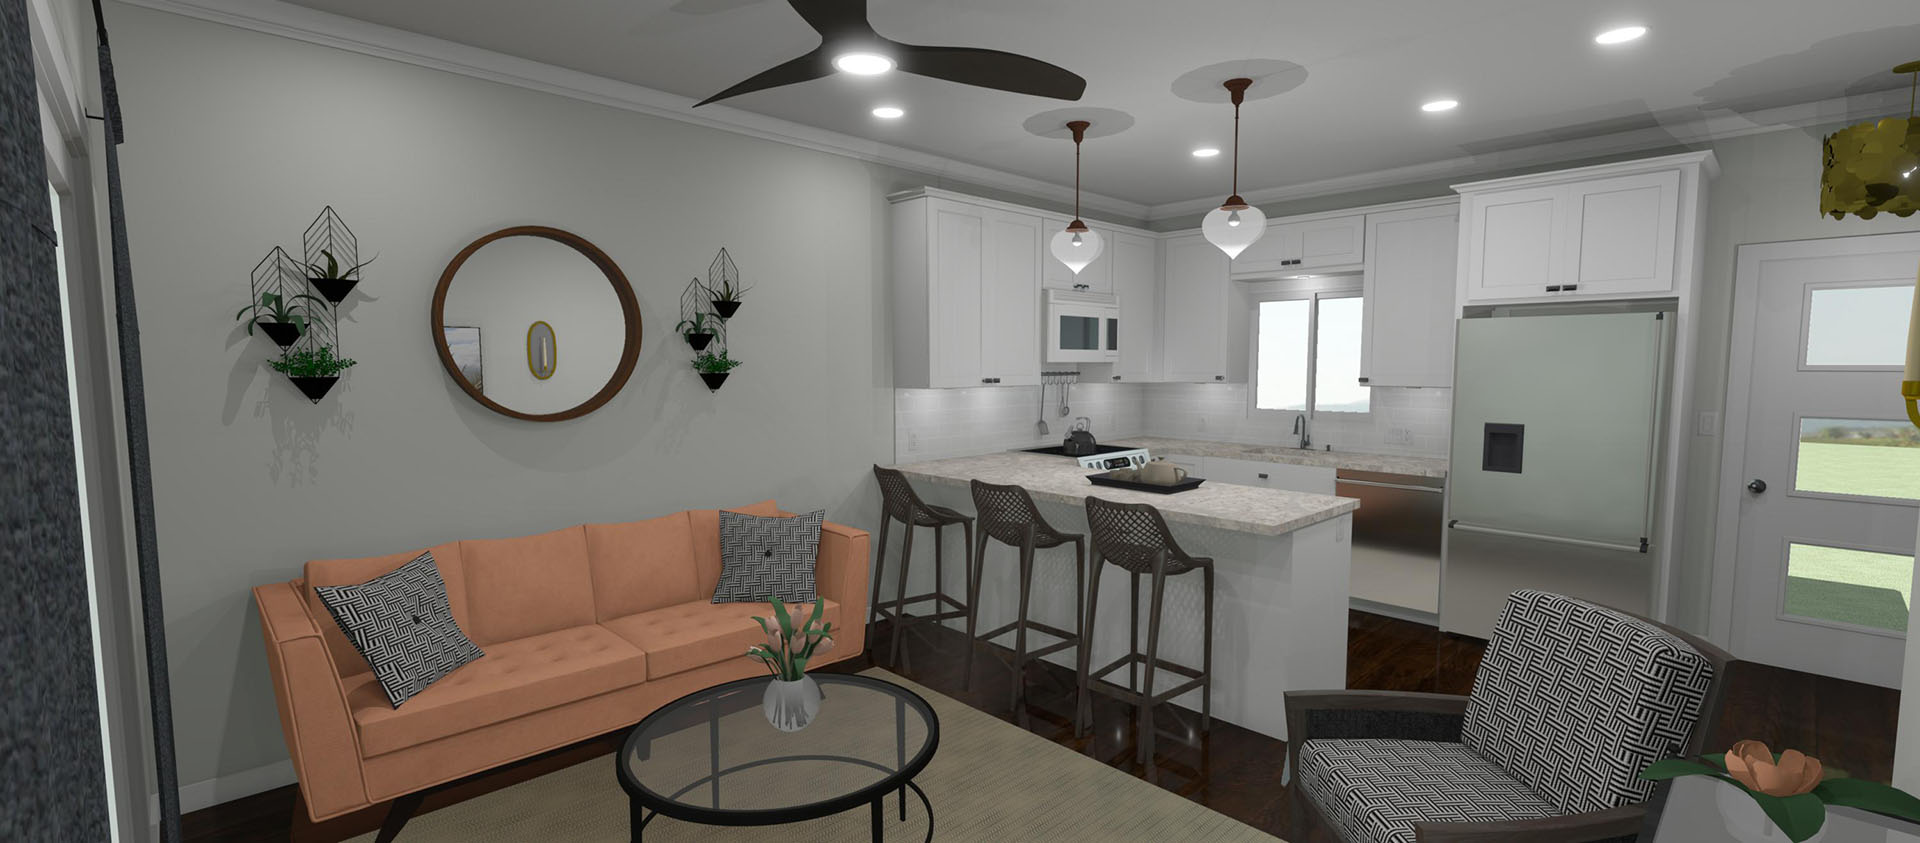 Kitchen with white cabinets, white marble counter, and a small living room